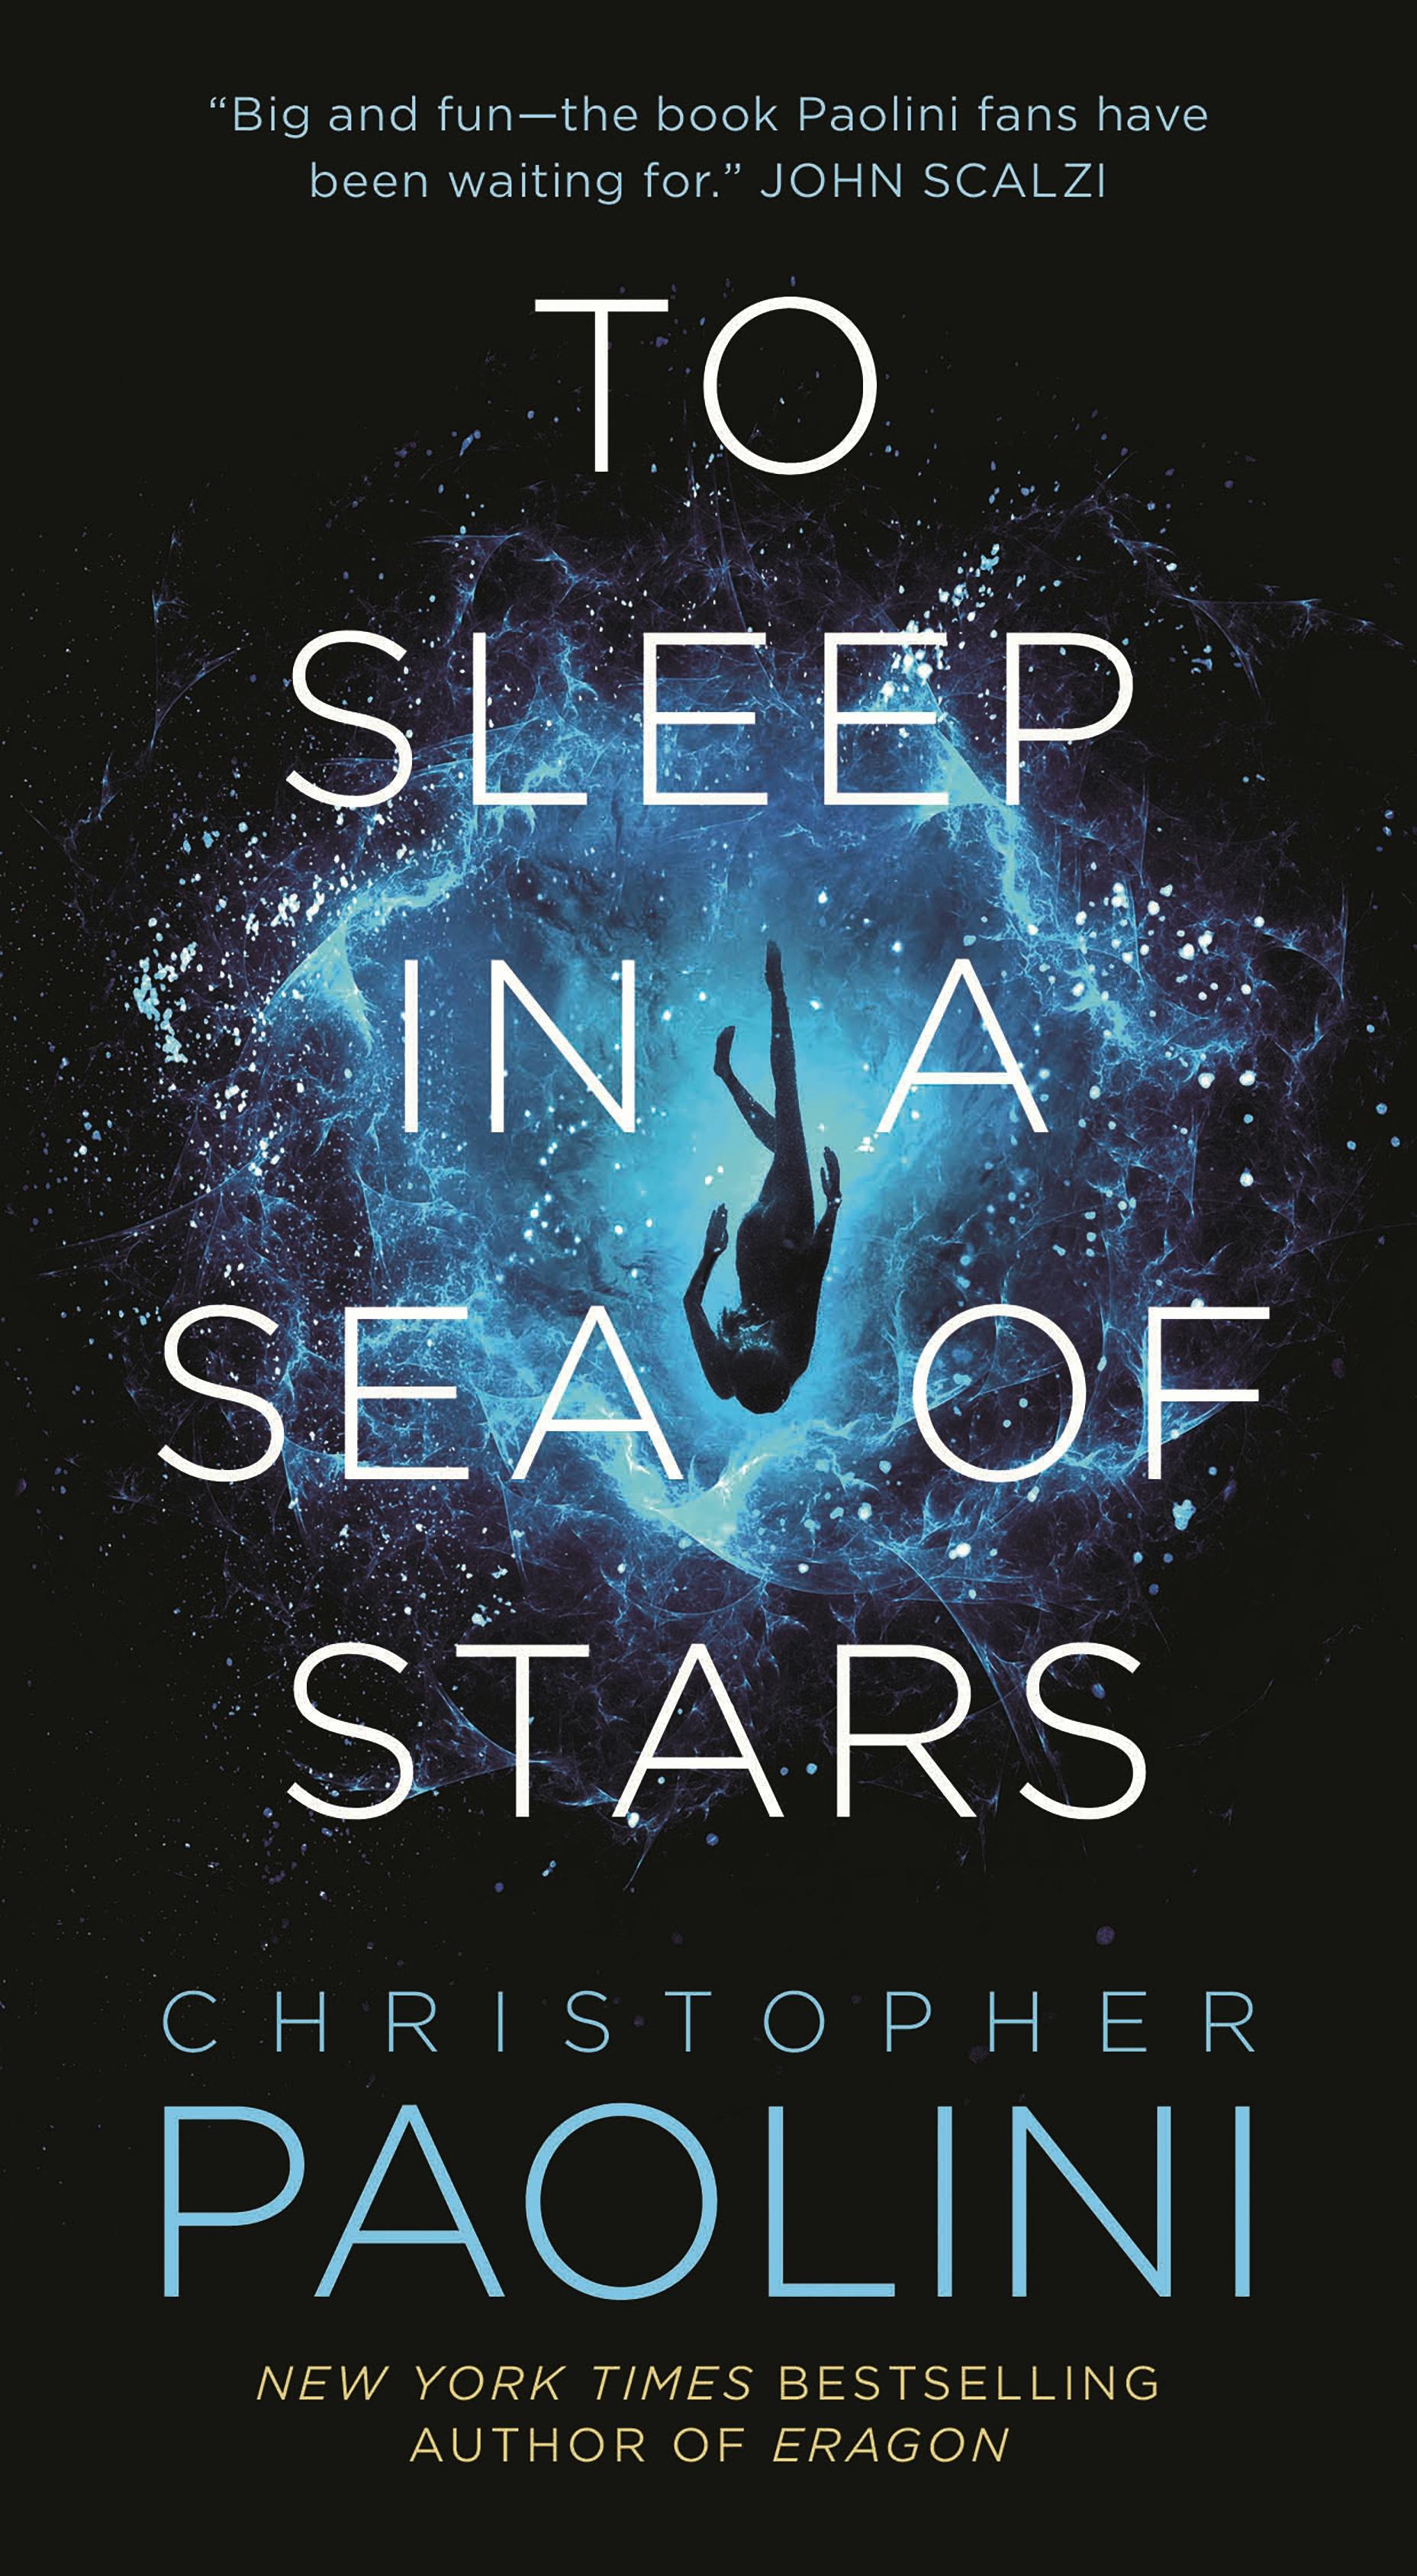 To Sleep in a Sea of Stars Book Review - %